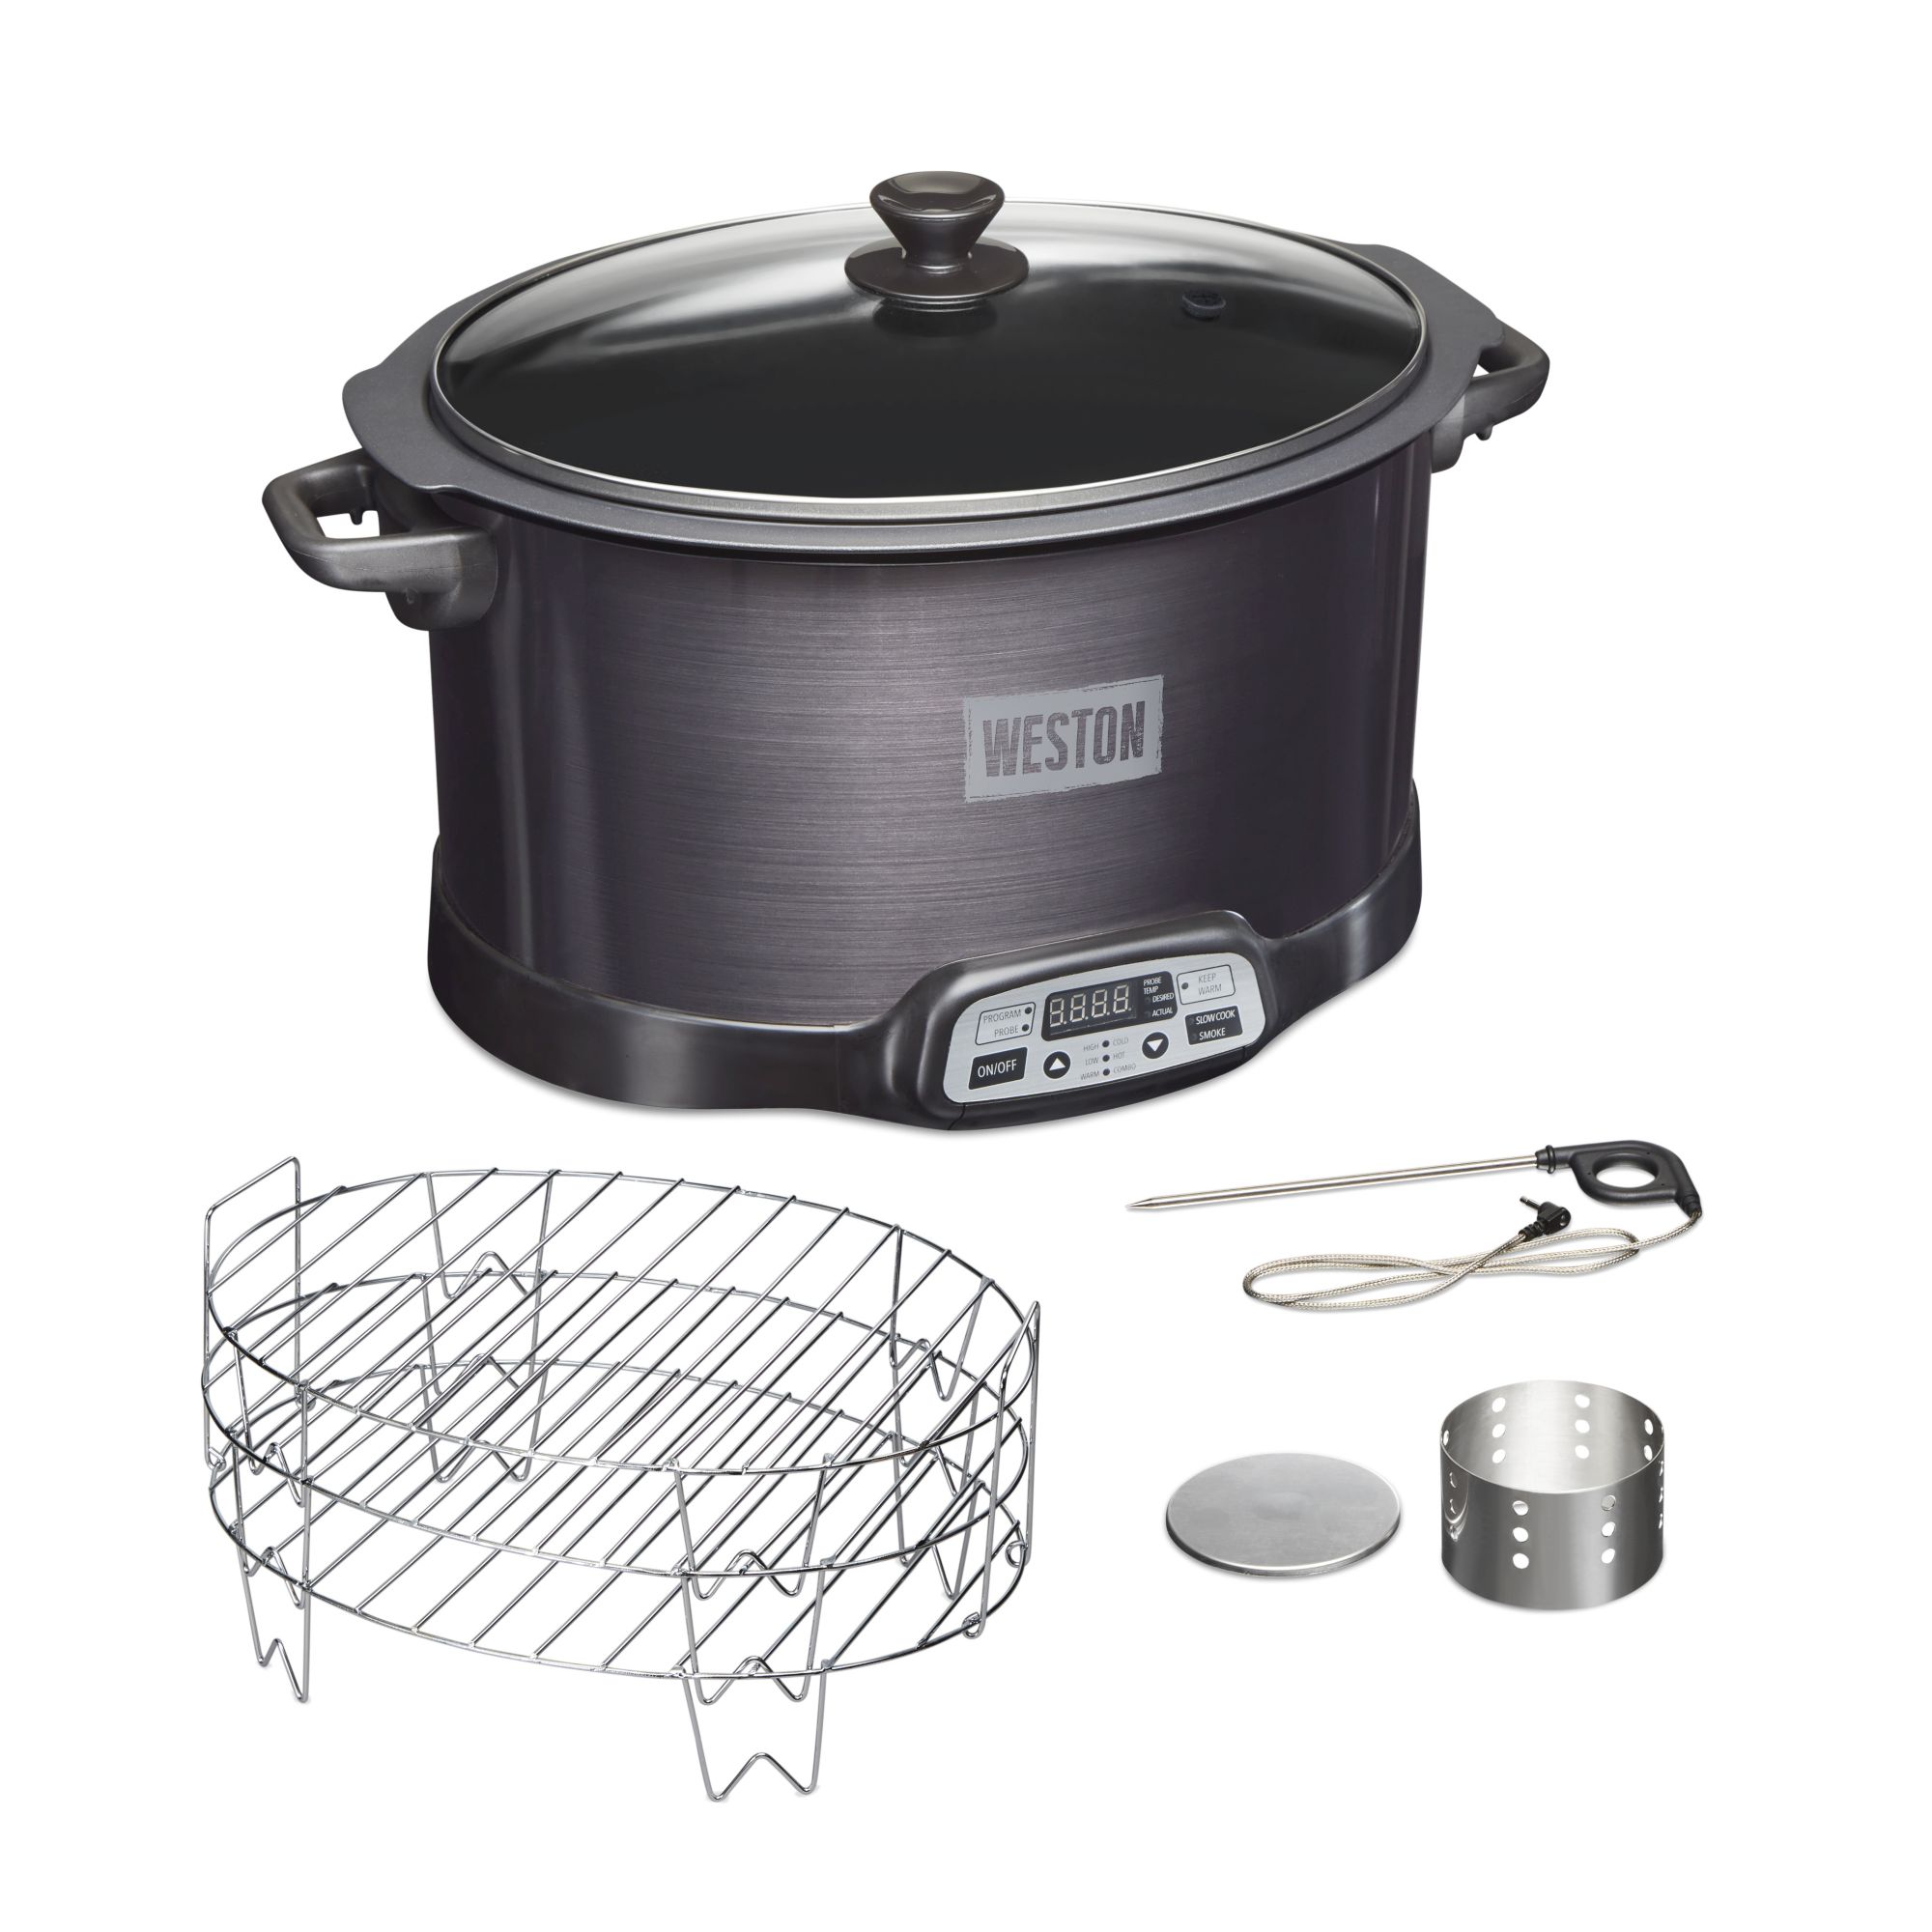 Crockpot™ 2-Quart Slow Cooker in Stainless Steel, 2 Qt - Jay C Food Stores